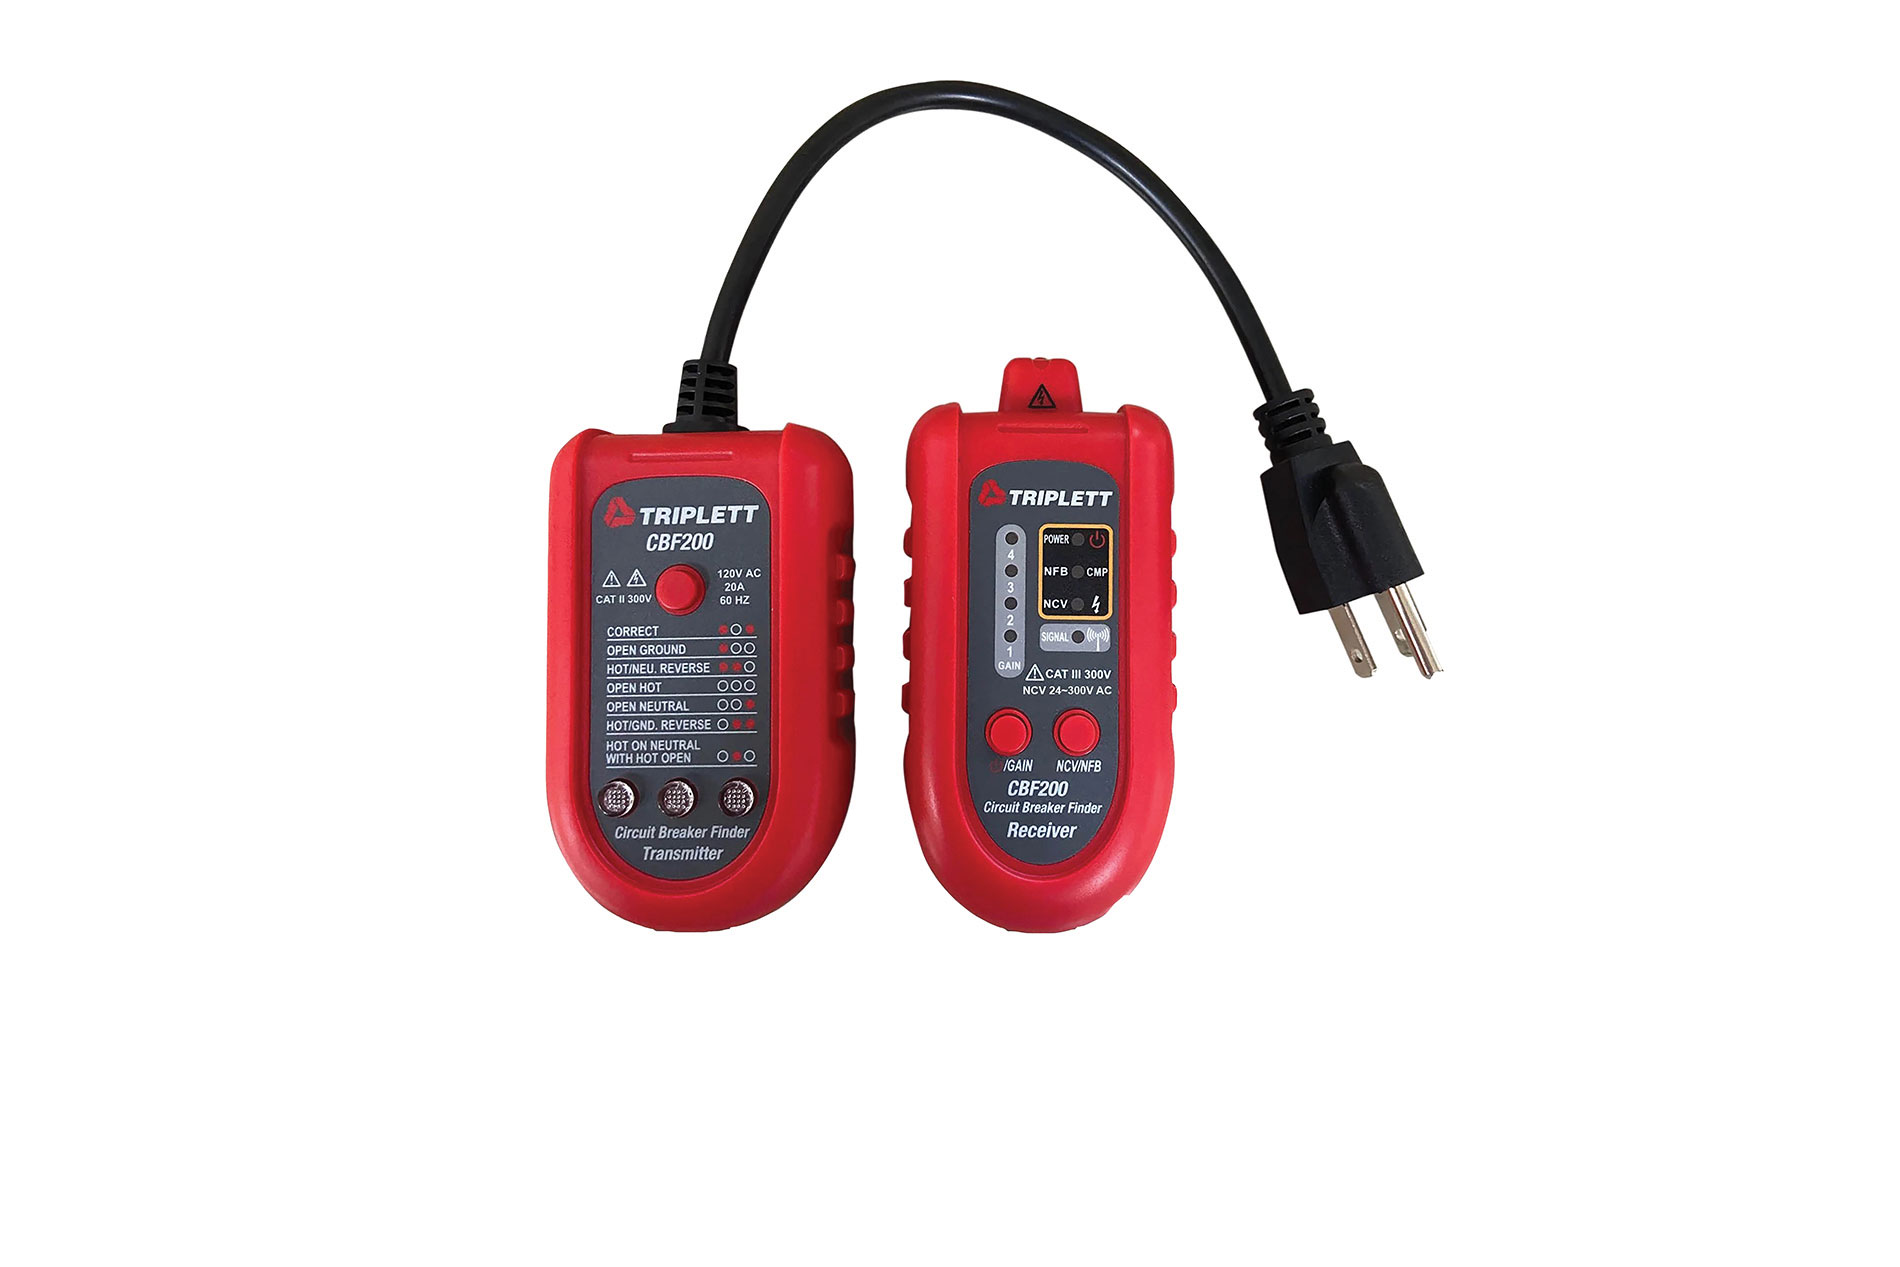 Red and black circuit breaker finder. Image by Triplett Test Equipment and Tools.